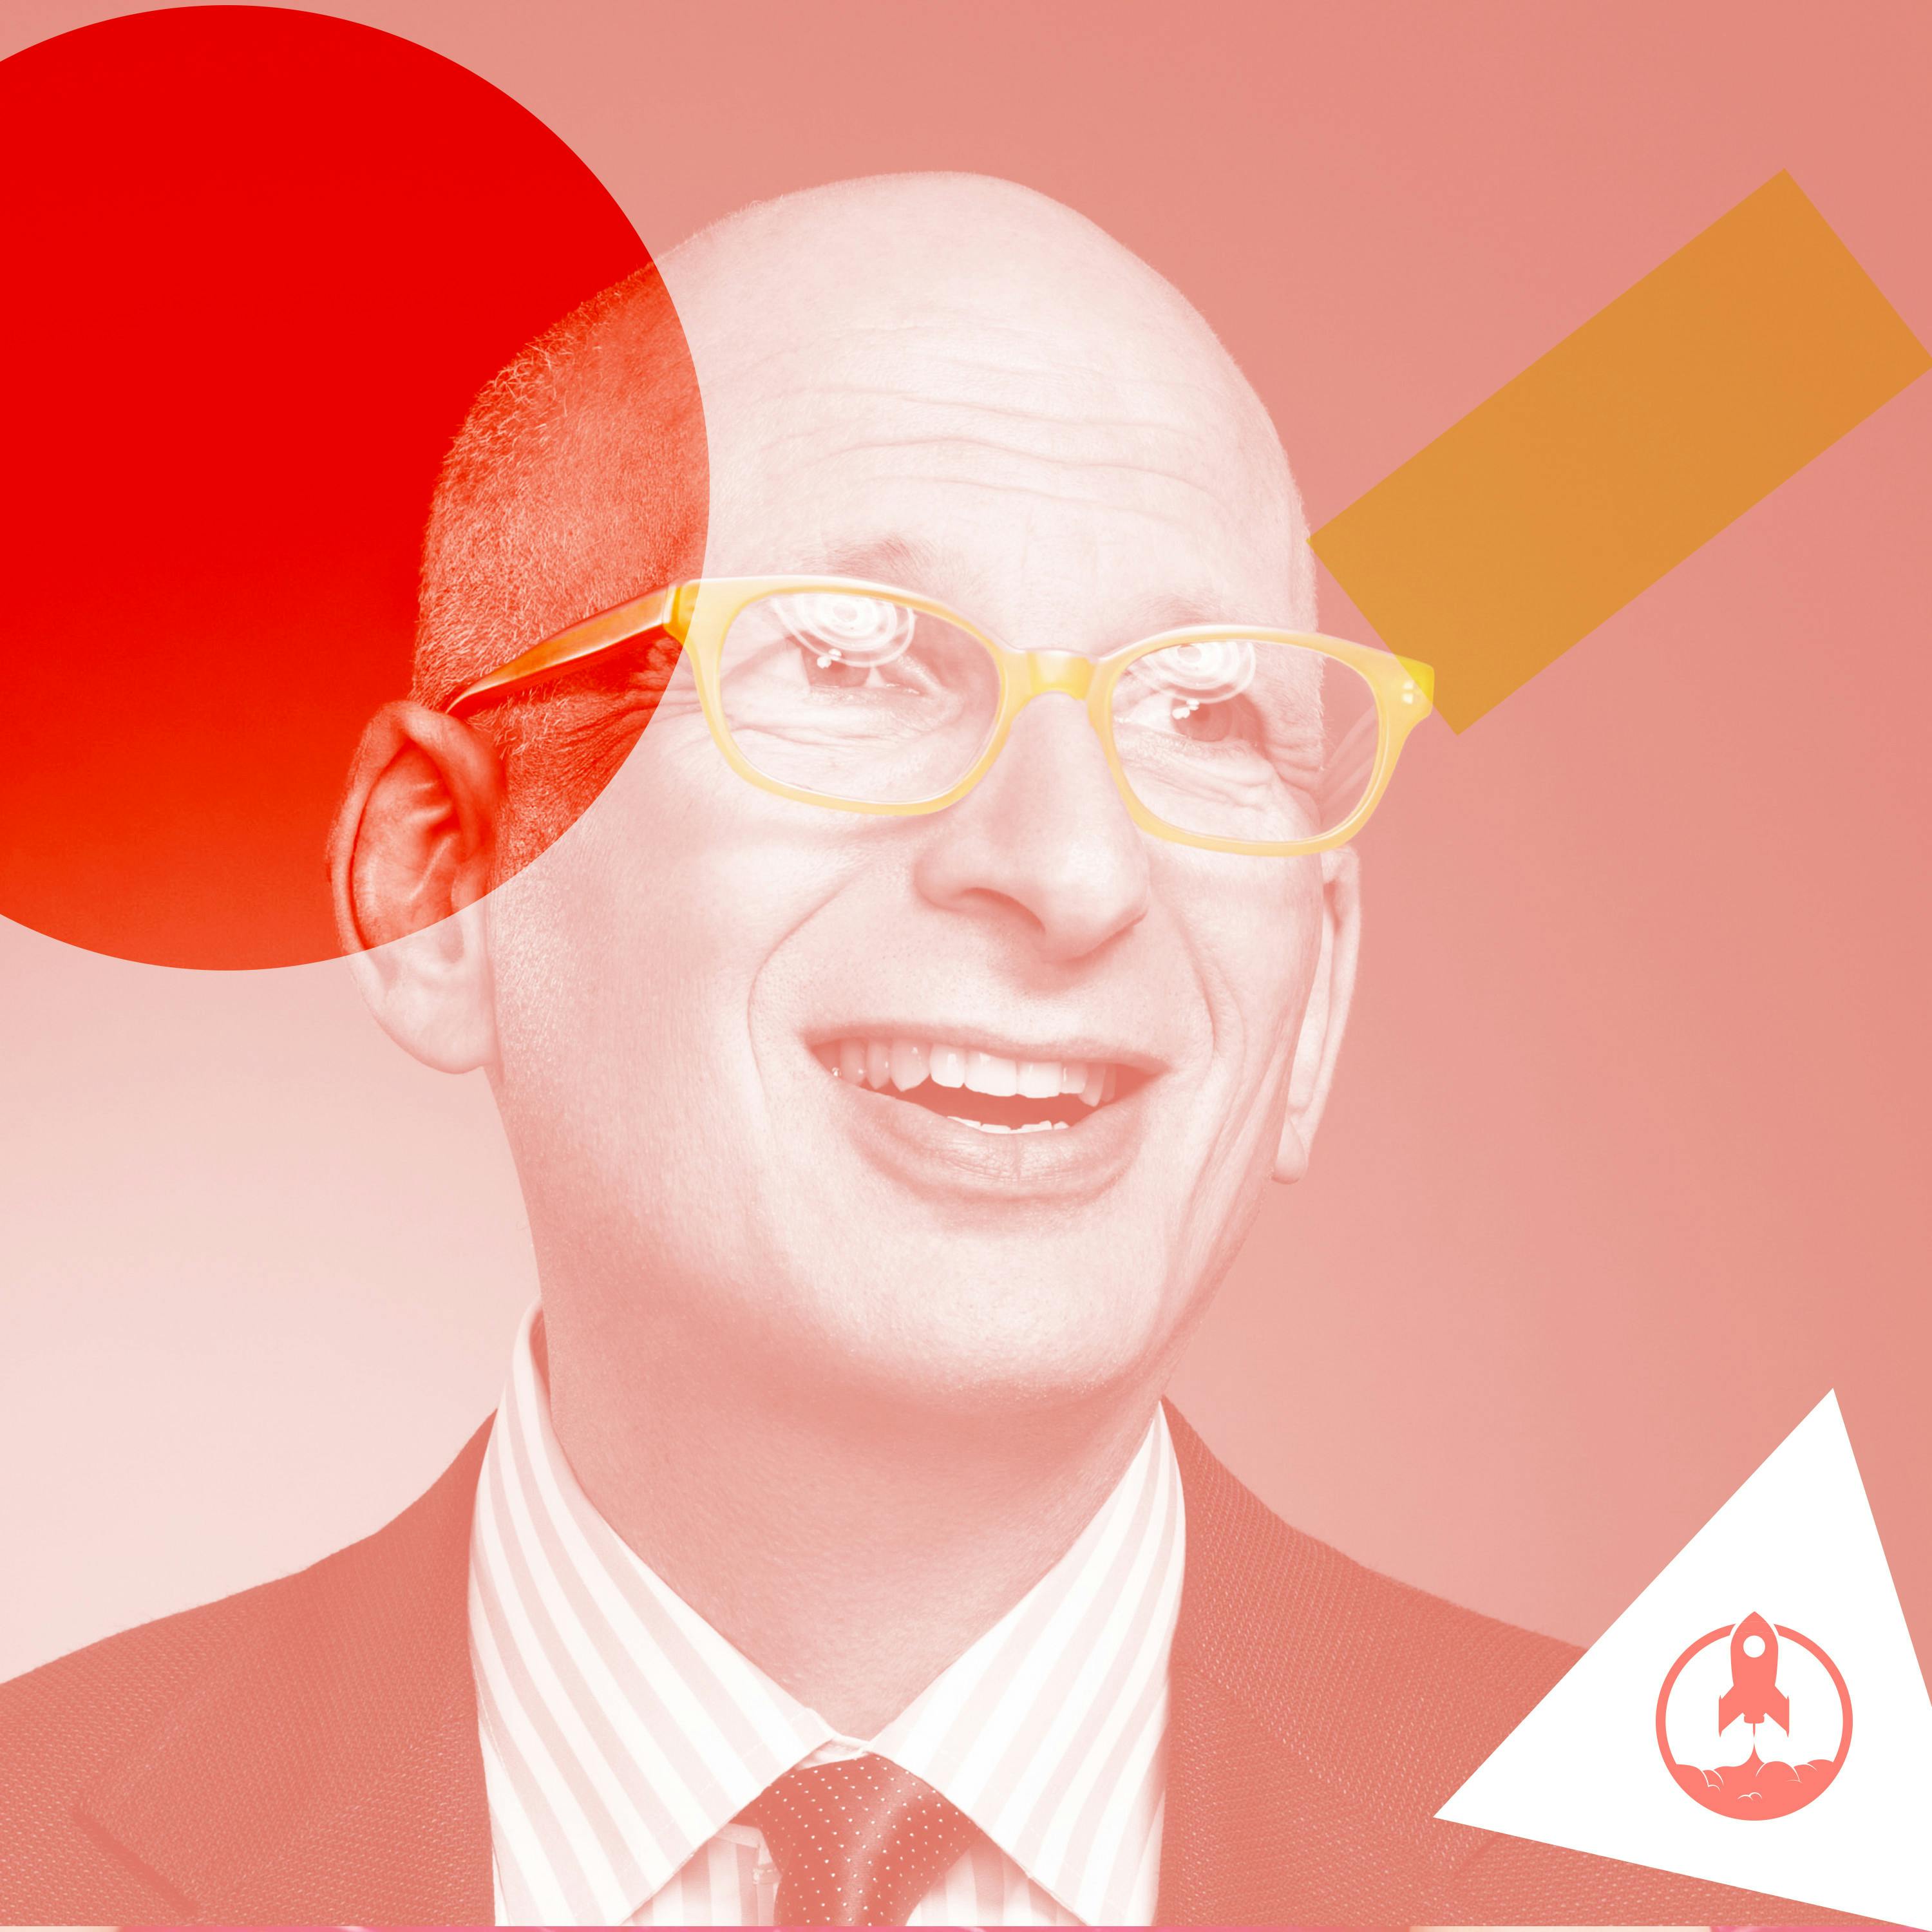 Interview: Seth Godin on Achieving Greatness